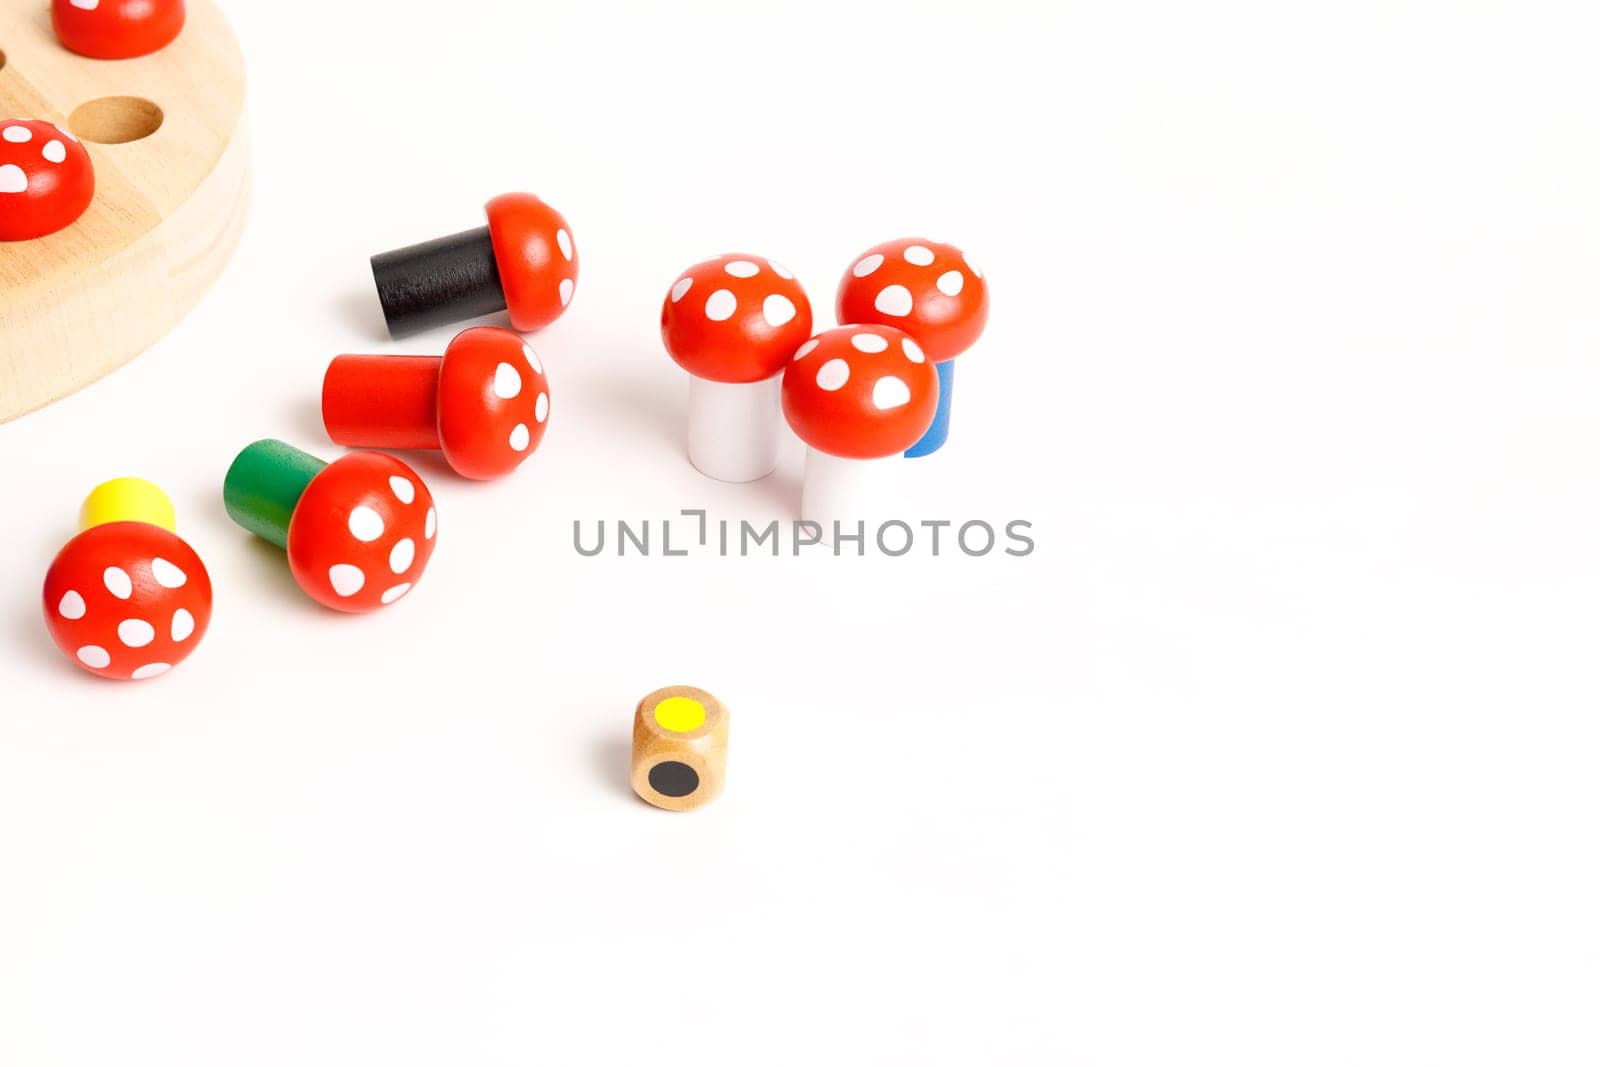 Children's educational board game with a wooden board and colorful mushrooms, isolated on white background, copy space by Rom4ek